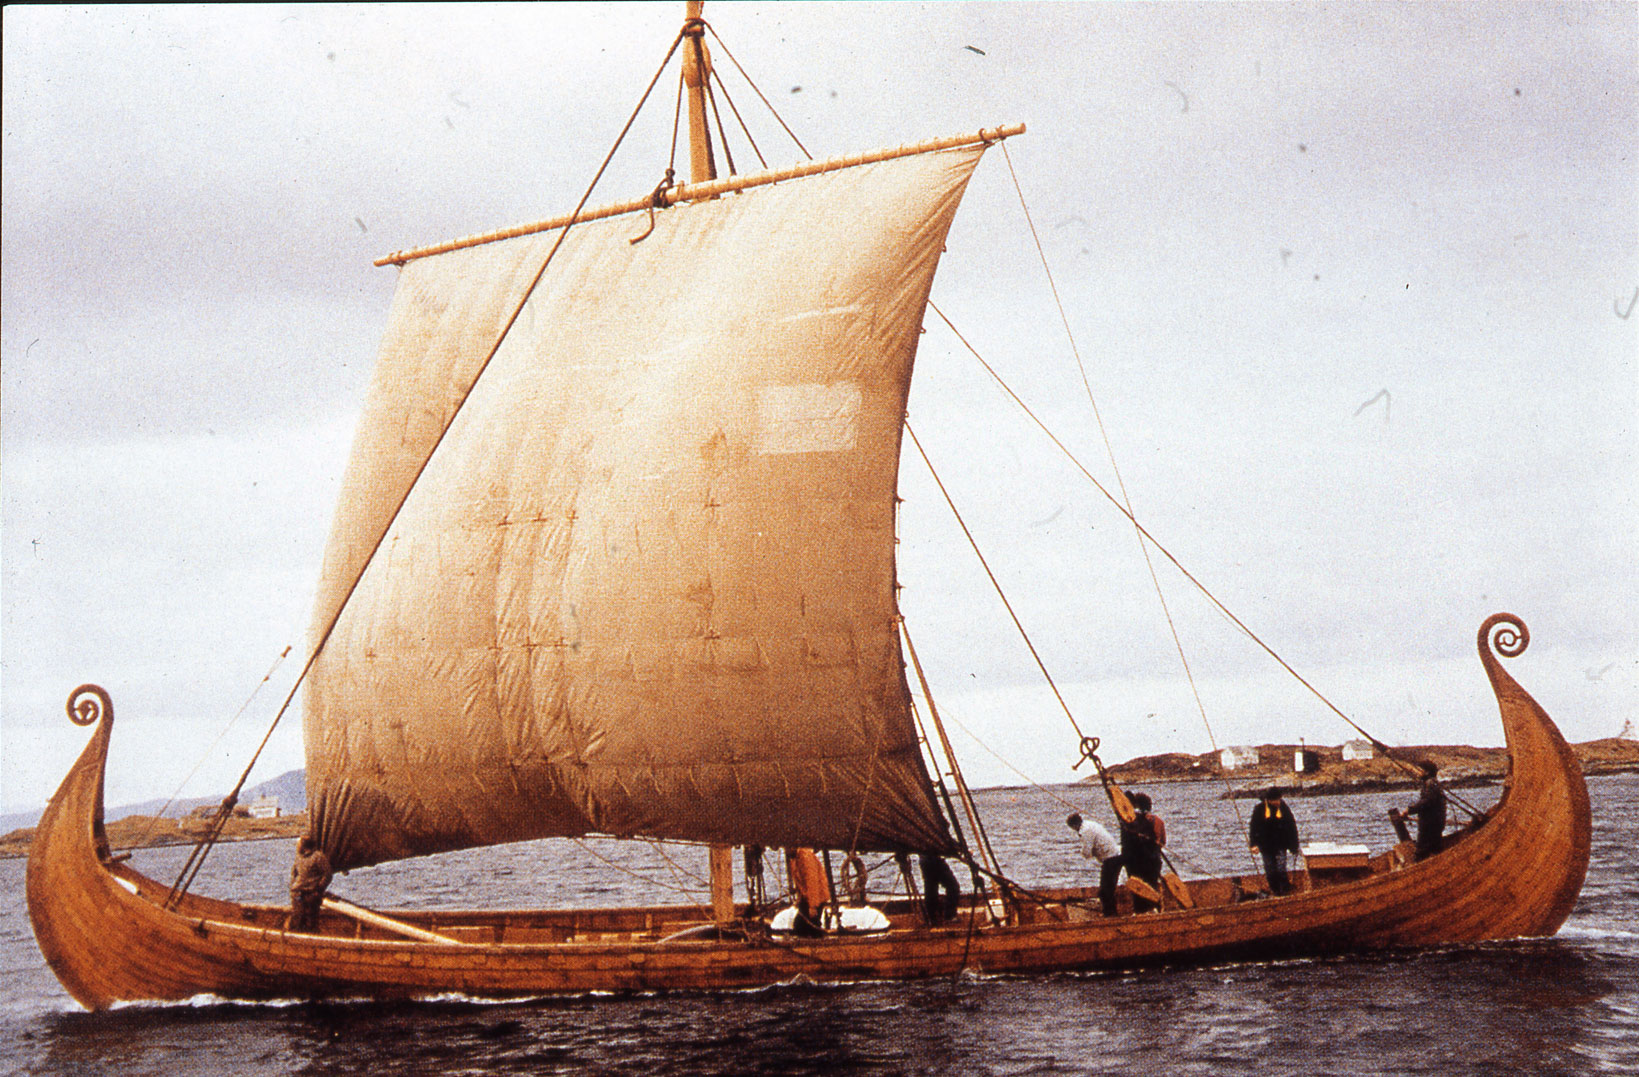 Photograph of a reconstructed Viking ship at Roskilde, Denmark. Taken by Terry Barry